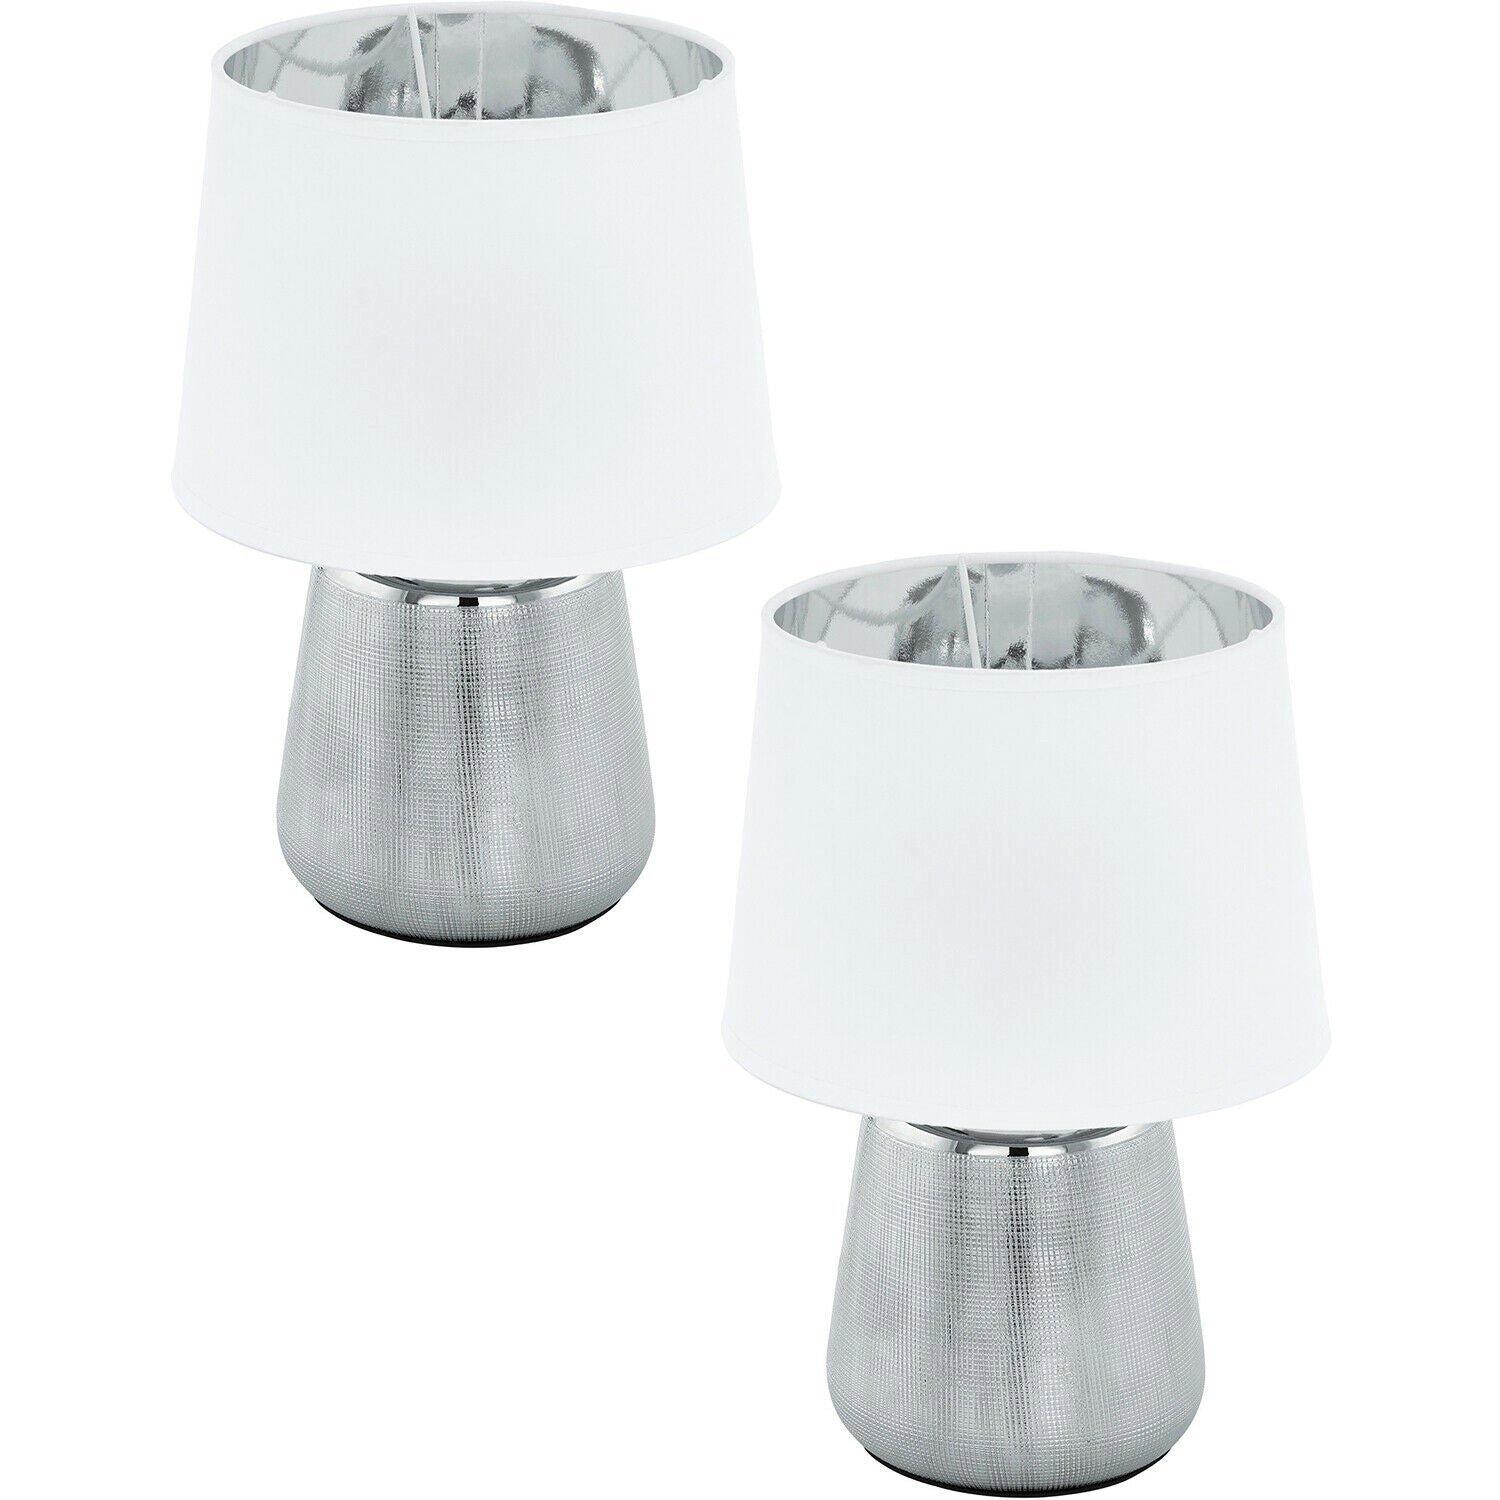 2 PACK Table Lamp Colour Silver Base Shade White & Silver Fabric E14 1x 40W